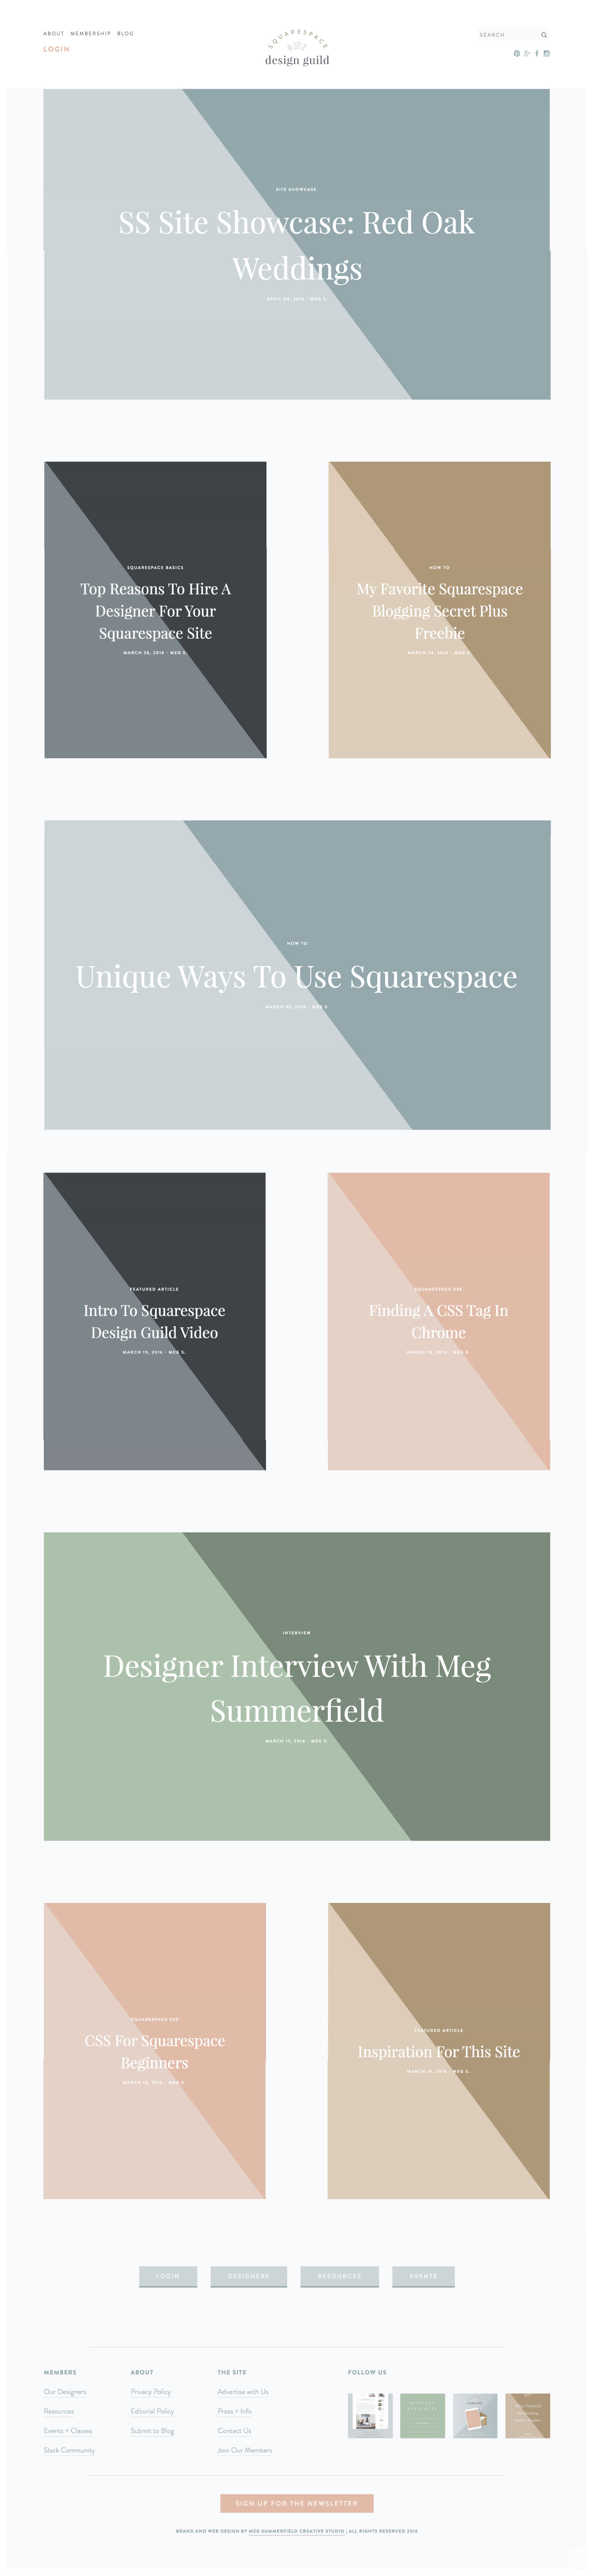 squarespace design guild, a resource for designers working in squarespace for client's websites